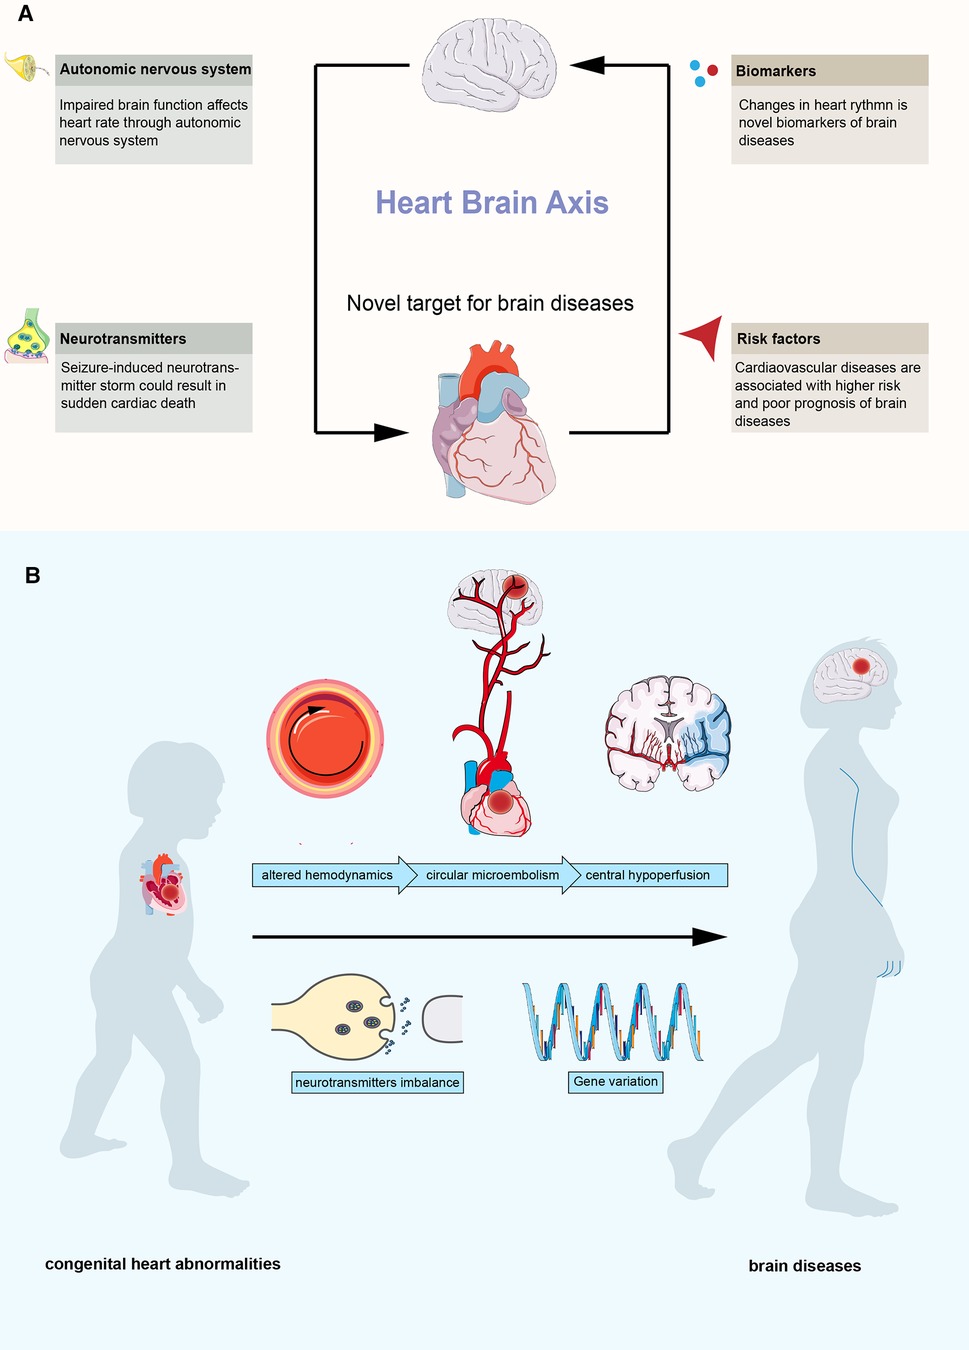 Frontiers Heart brain Axis Association Of Congenital Heart Abnormality And Brain Diseases